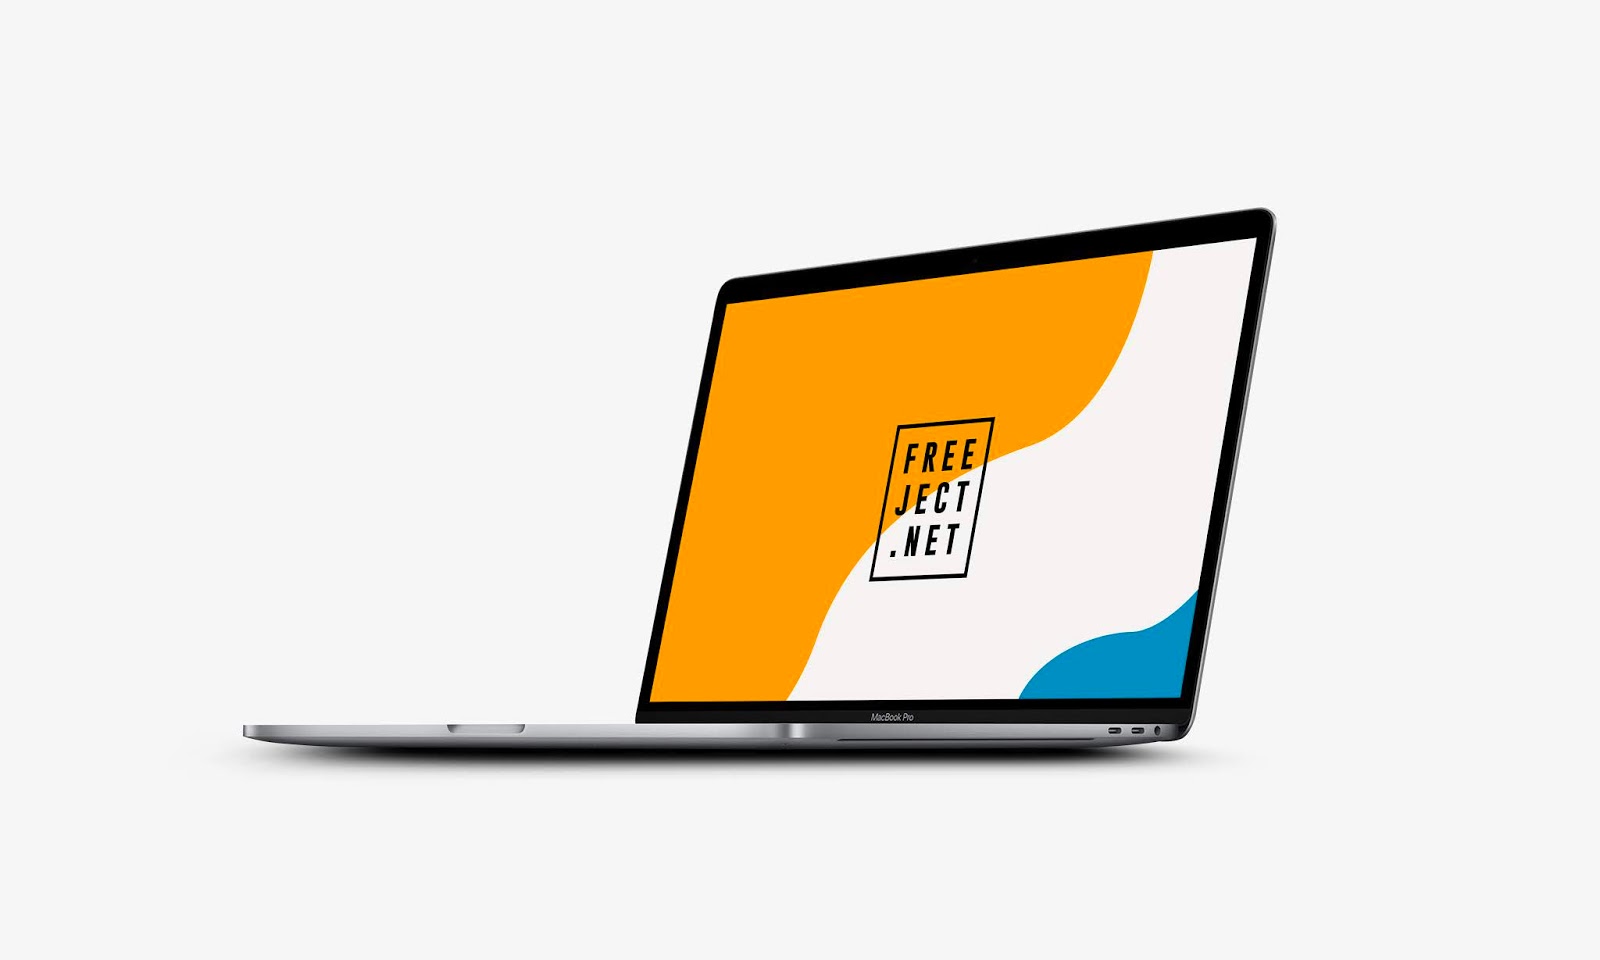 Download Free Download Macbook Mockup Template - PSD File | FREEJECT